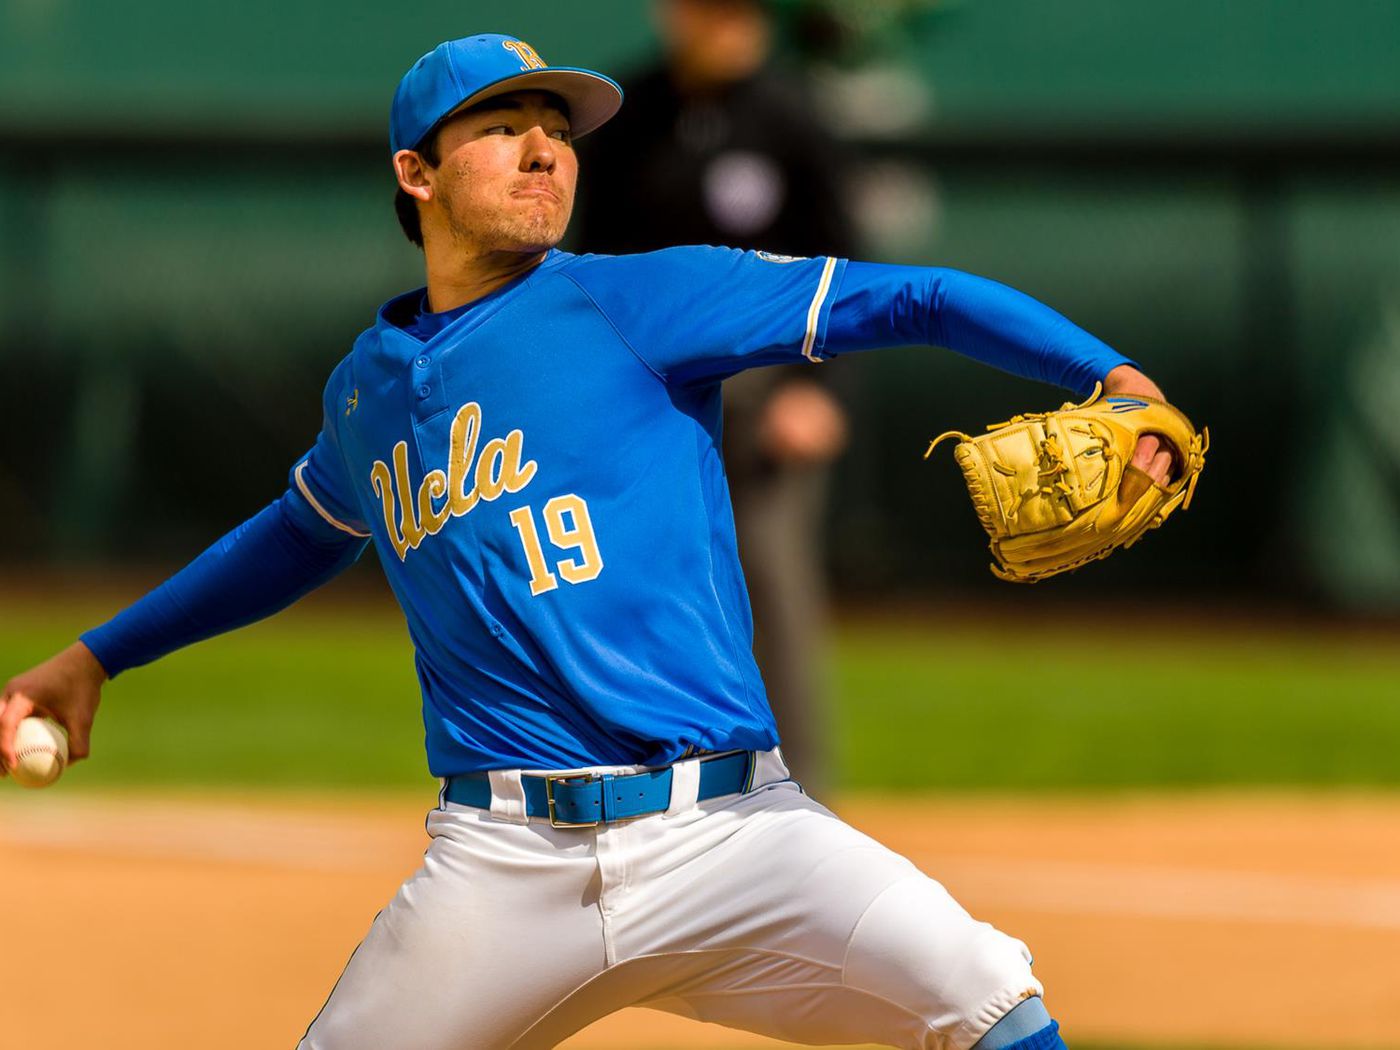 UCLA Baseball: Bruins Smoked by Trojans, 7-2; Look to Regroup